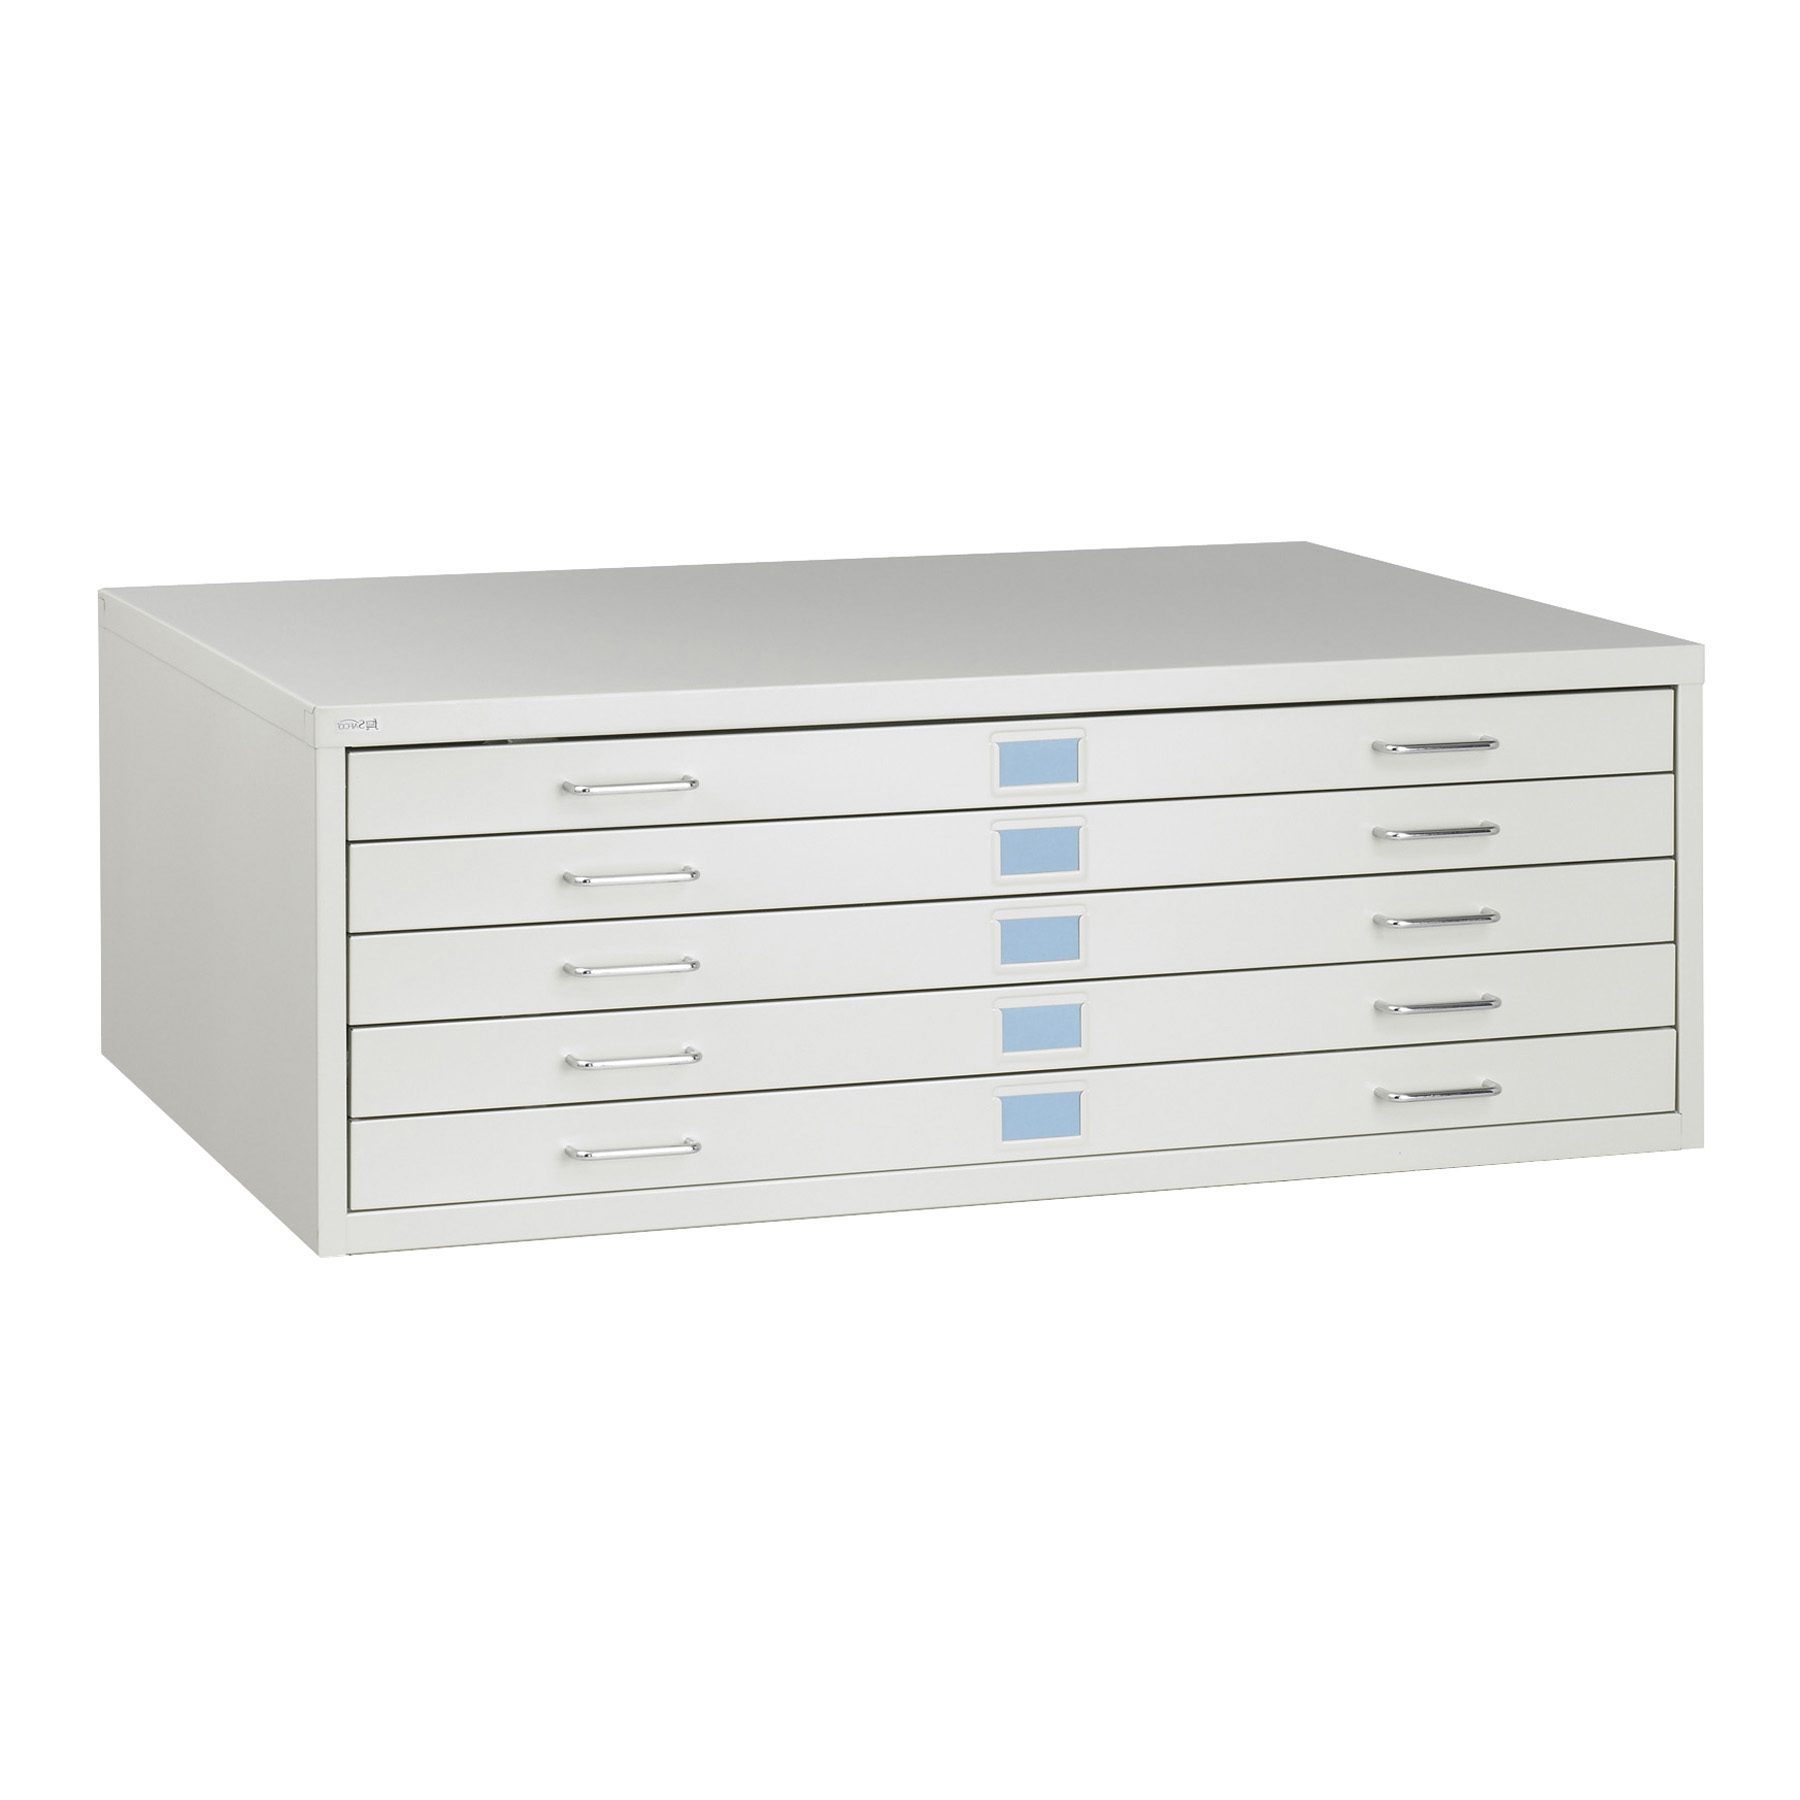 Safco 5-Drawer Steel Flat File for 24 x 36 Documents White